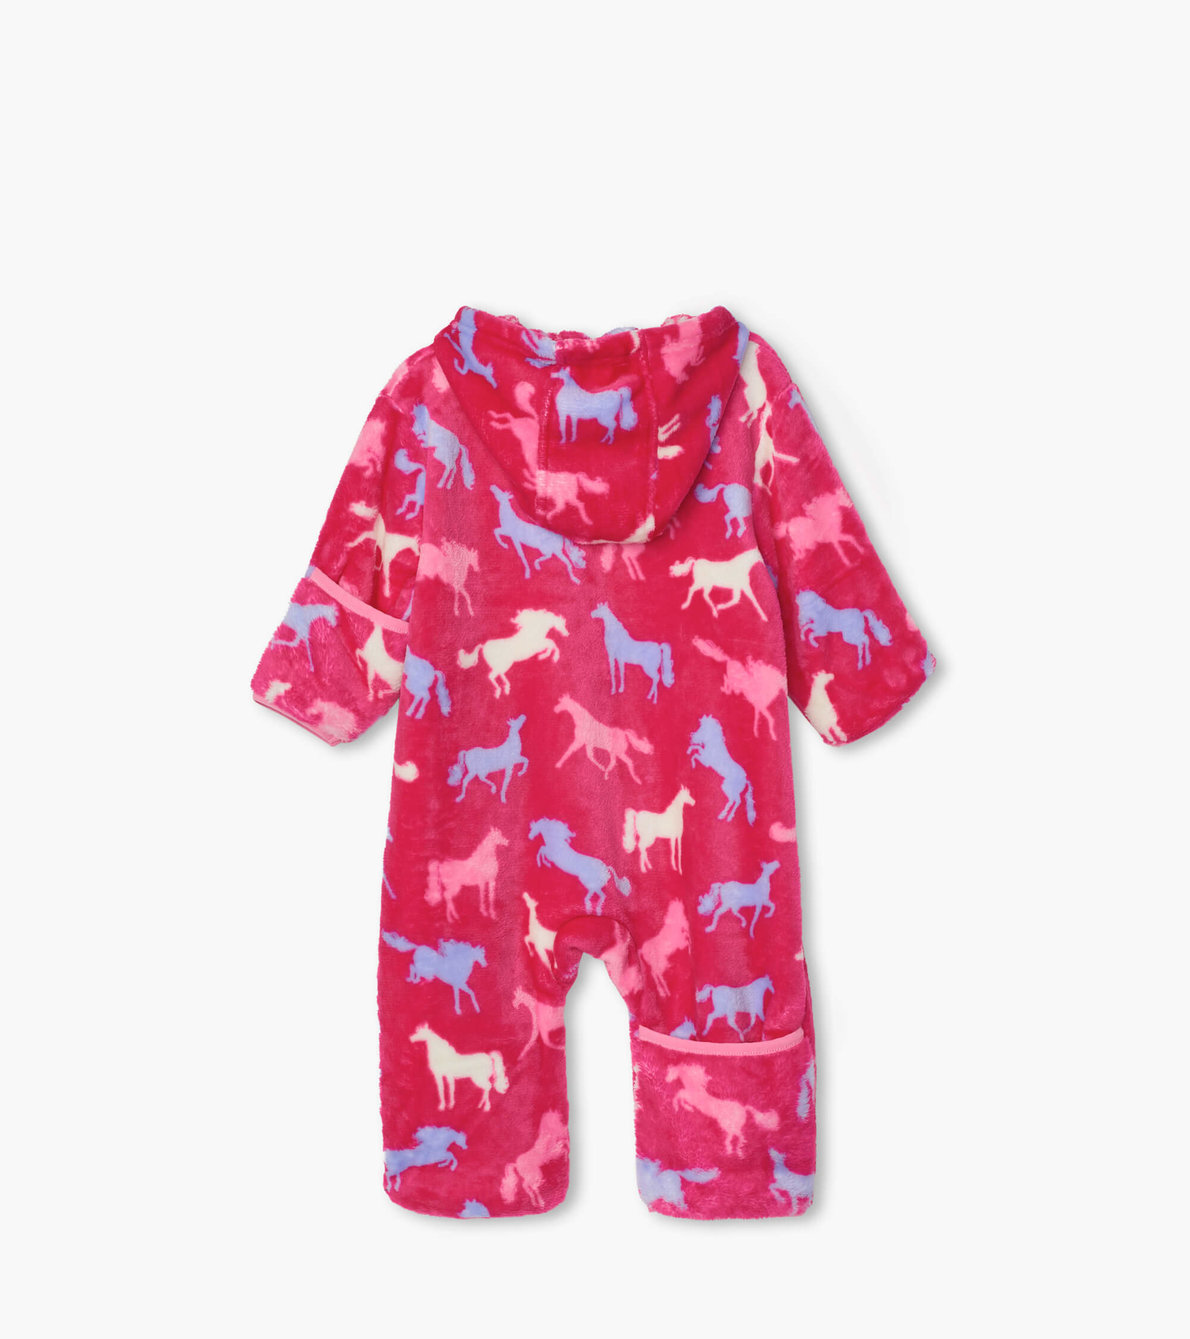 View larger image of Horse Silhouettes Fuzzy Fleece Baby Bundler